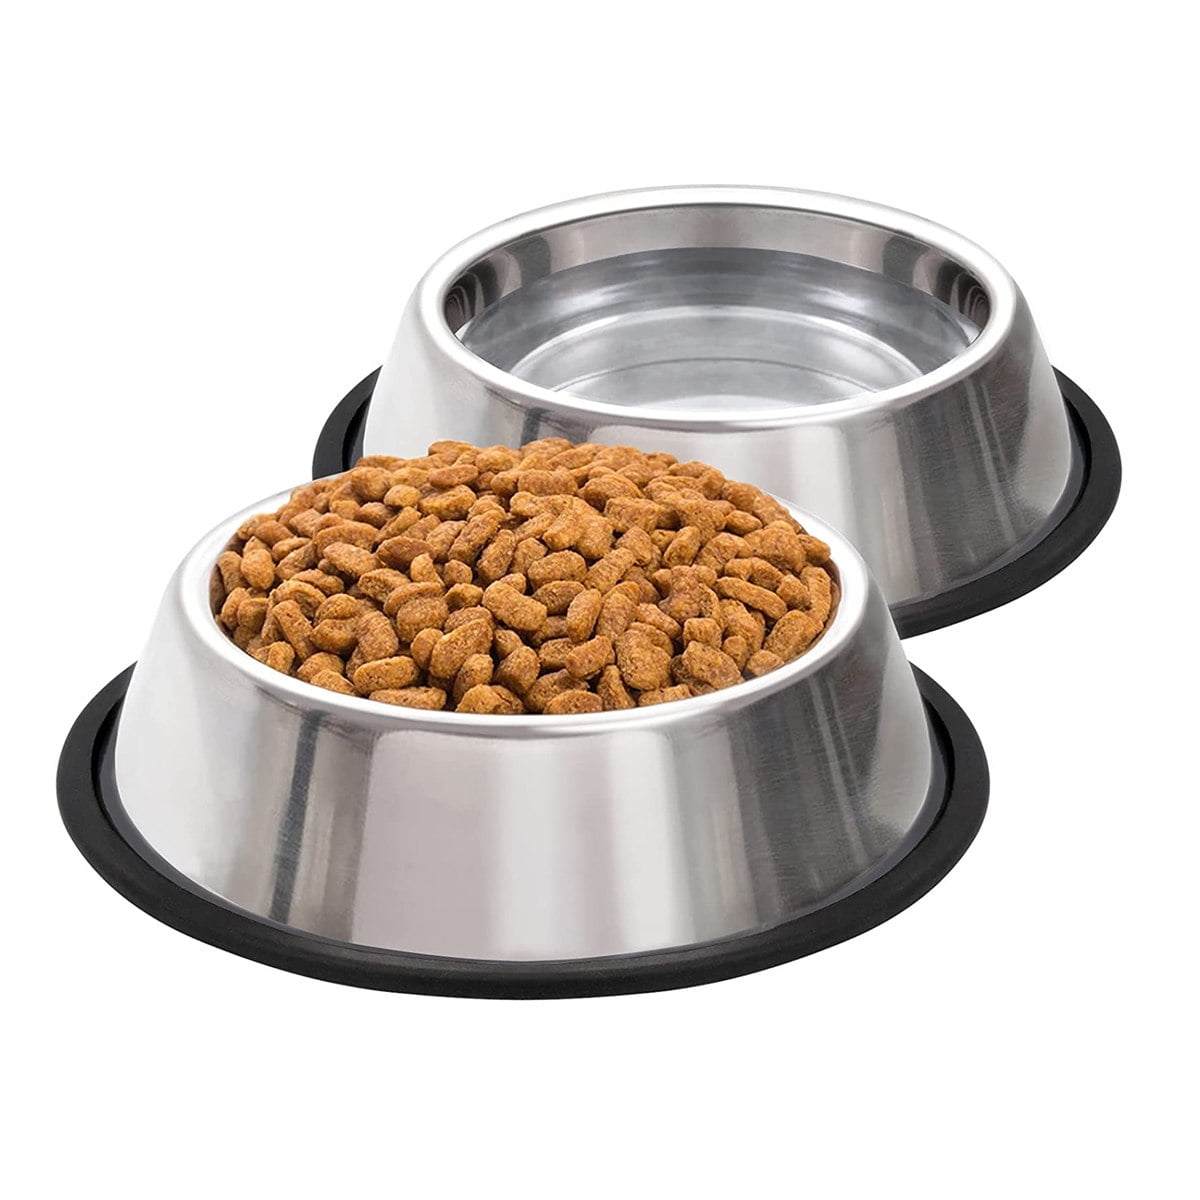 Pets Feeder Bowl and Water Bowl Perfect Choice for Dog Puppy Cat and Kitten 2Packs Stainless Steel Dog Bowl with Anti-Skid Rubber Base for Small/Medium/Large Pet Perfect Dish 26oz 